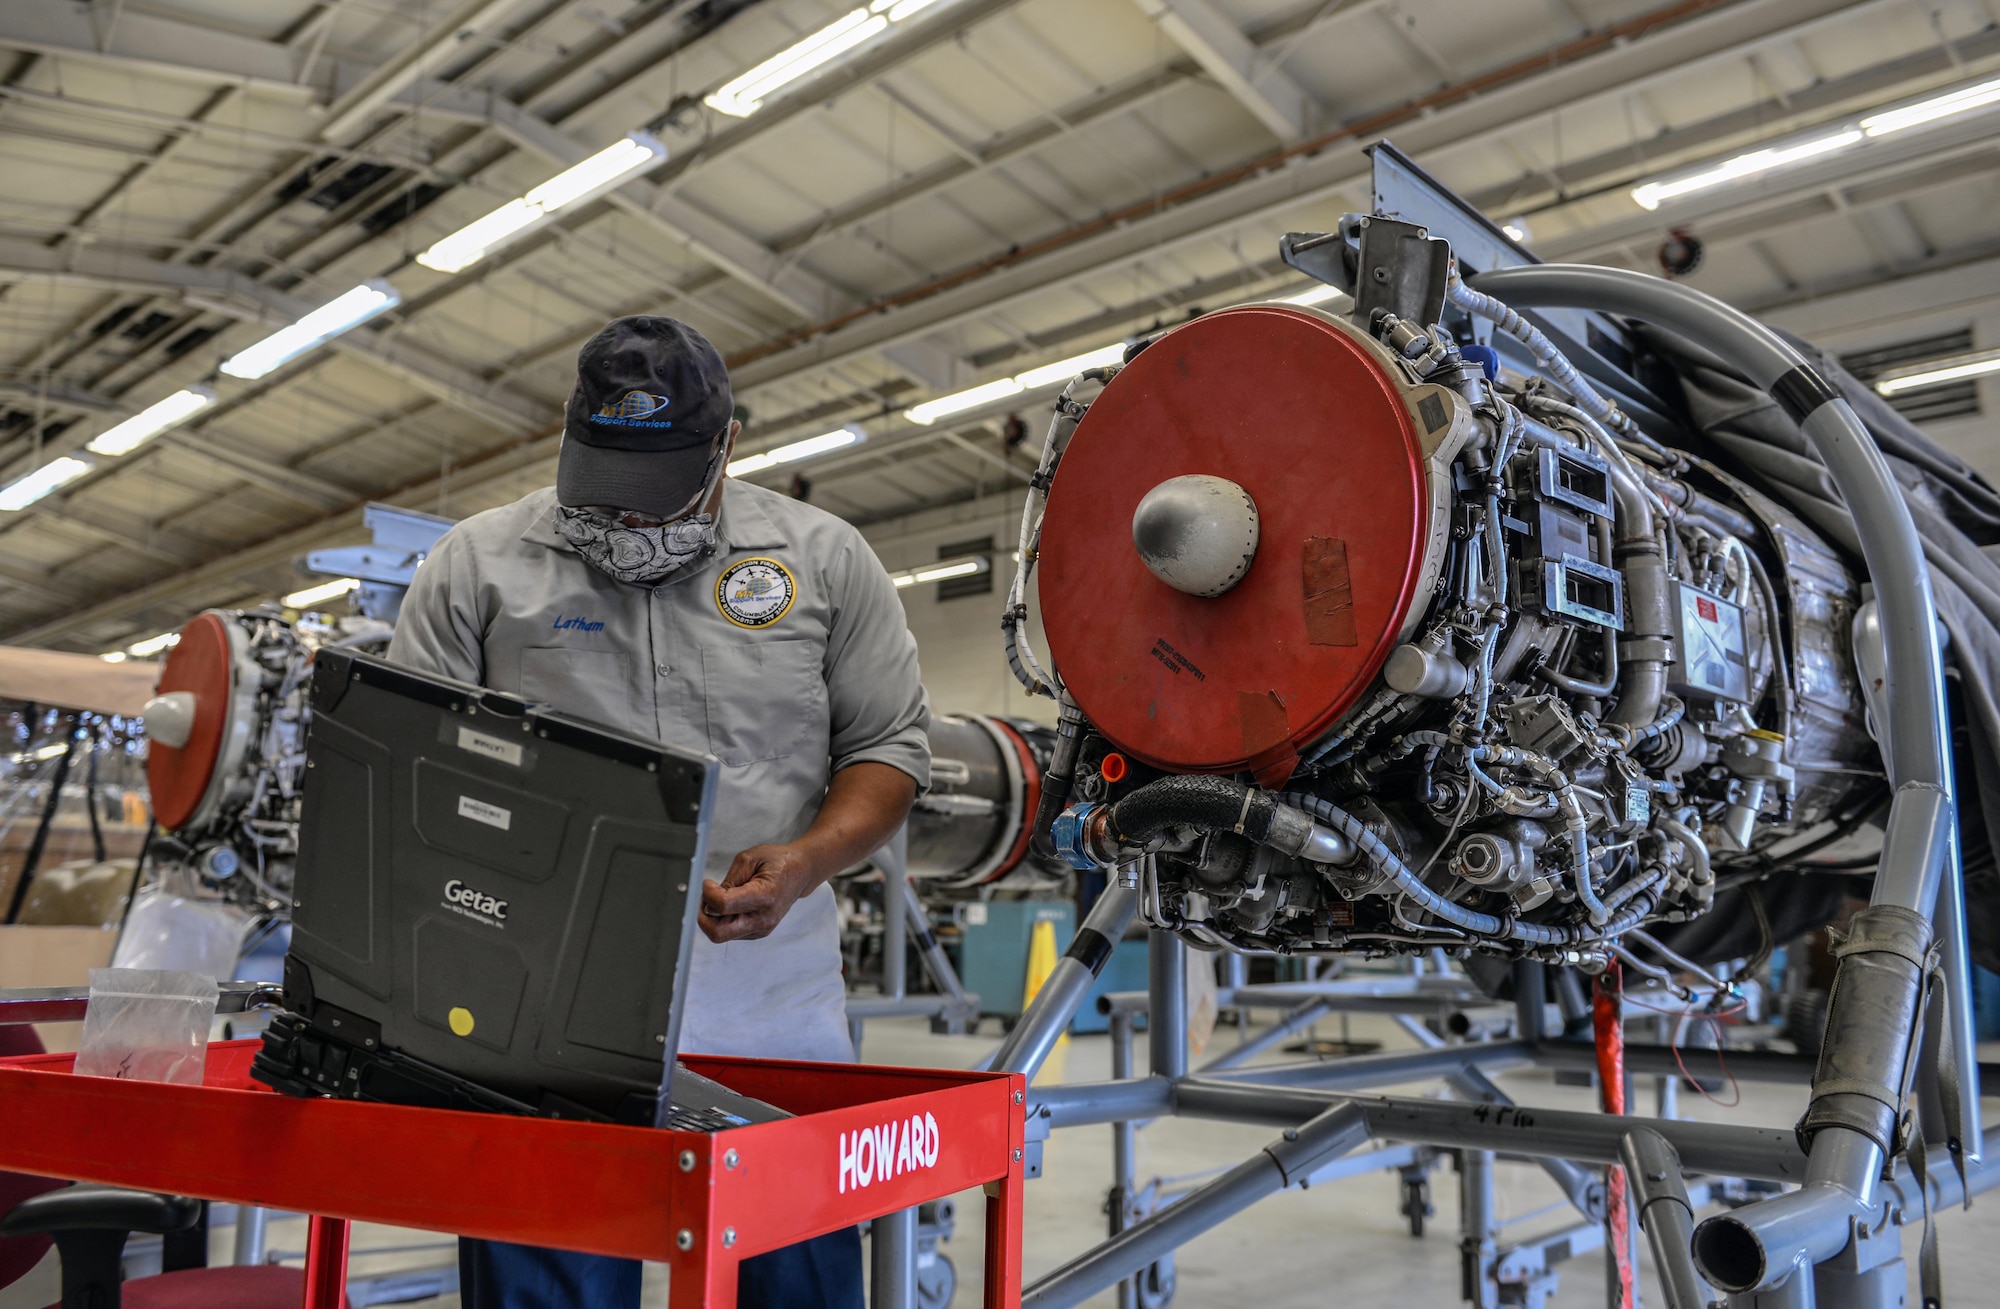 Willy Latham, M1 Support Services propulsion mechanic, gathers tools in order to perform maintenance on a General Electric J85-GE-5 turbojet engine April 17, 2020, at Columbus Air Force Base, Miss. The T-38 Talon is equipped with two General Electric J85-GE-5 turbojet engines. (U.S. Air Force photo by Airman 1st Class Davis Donaldson)